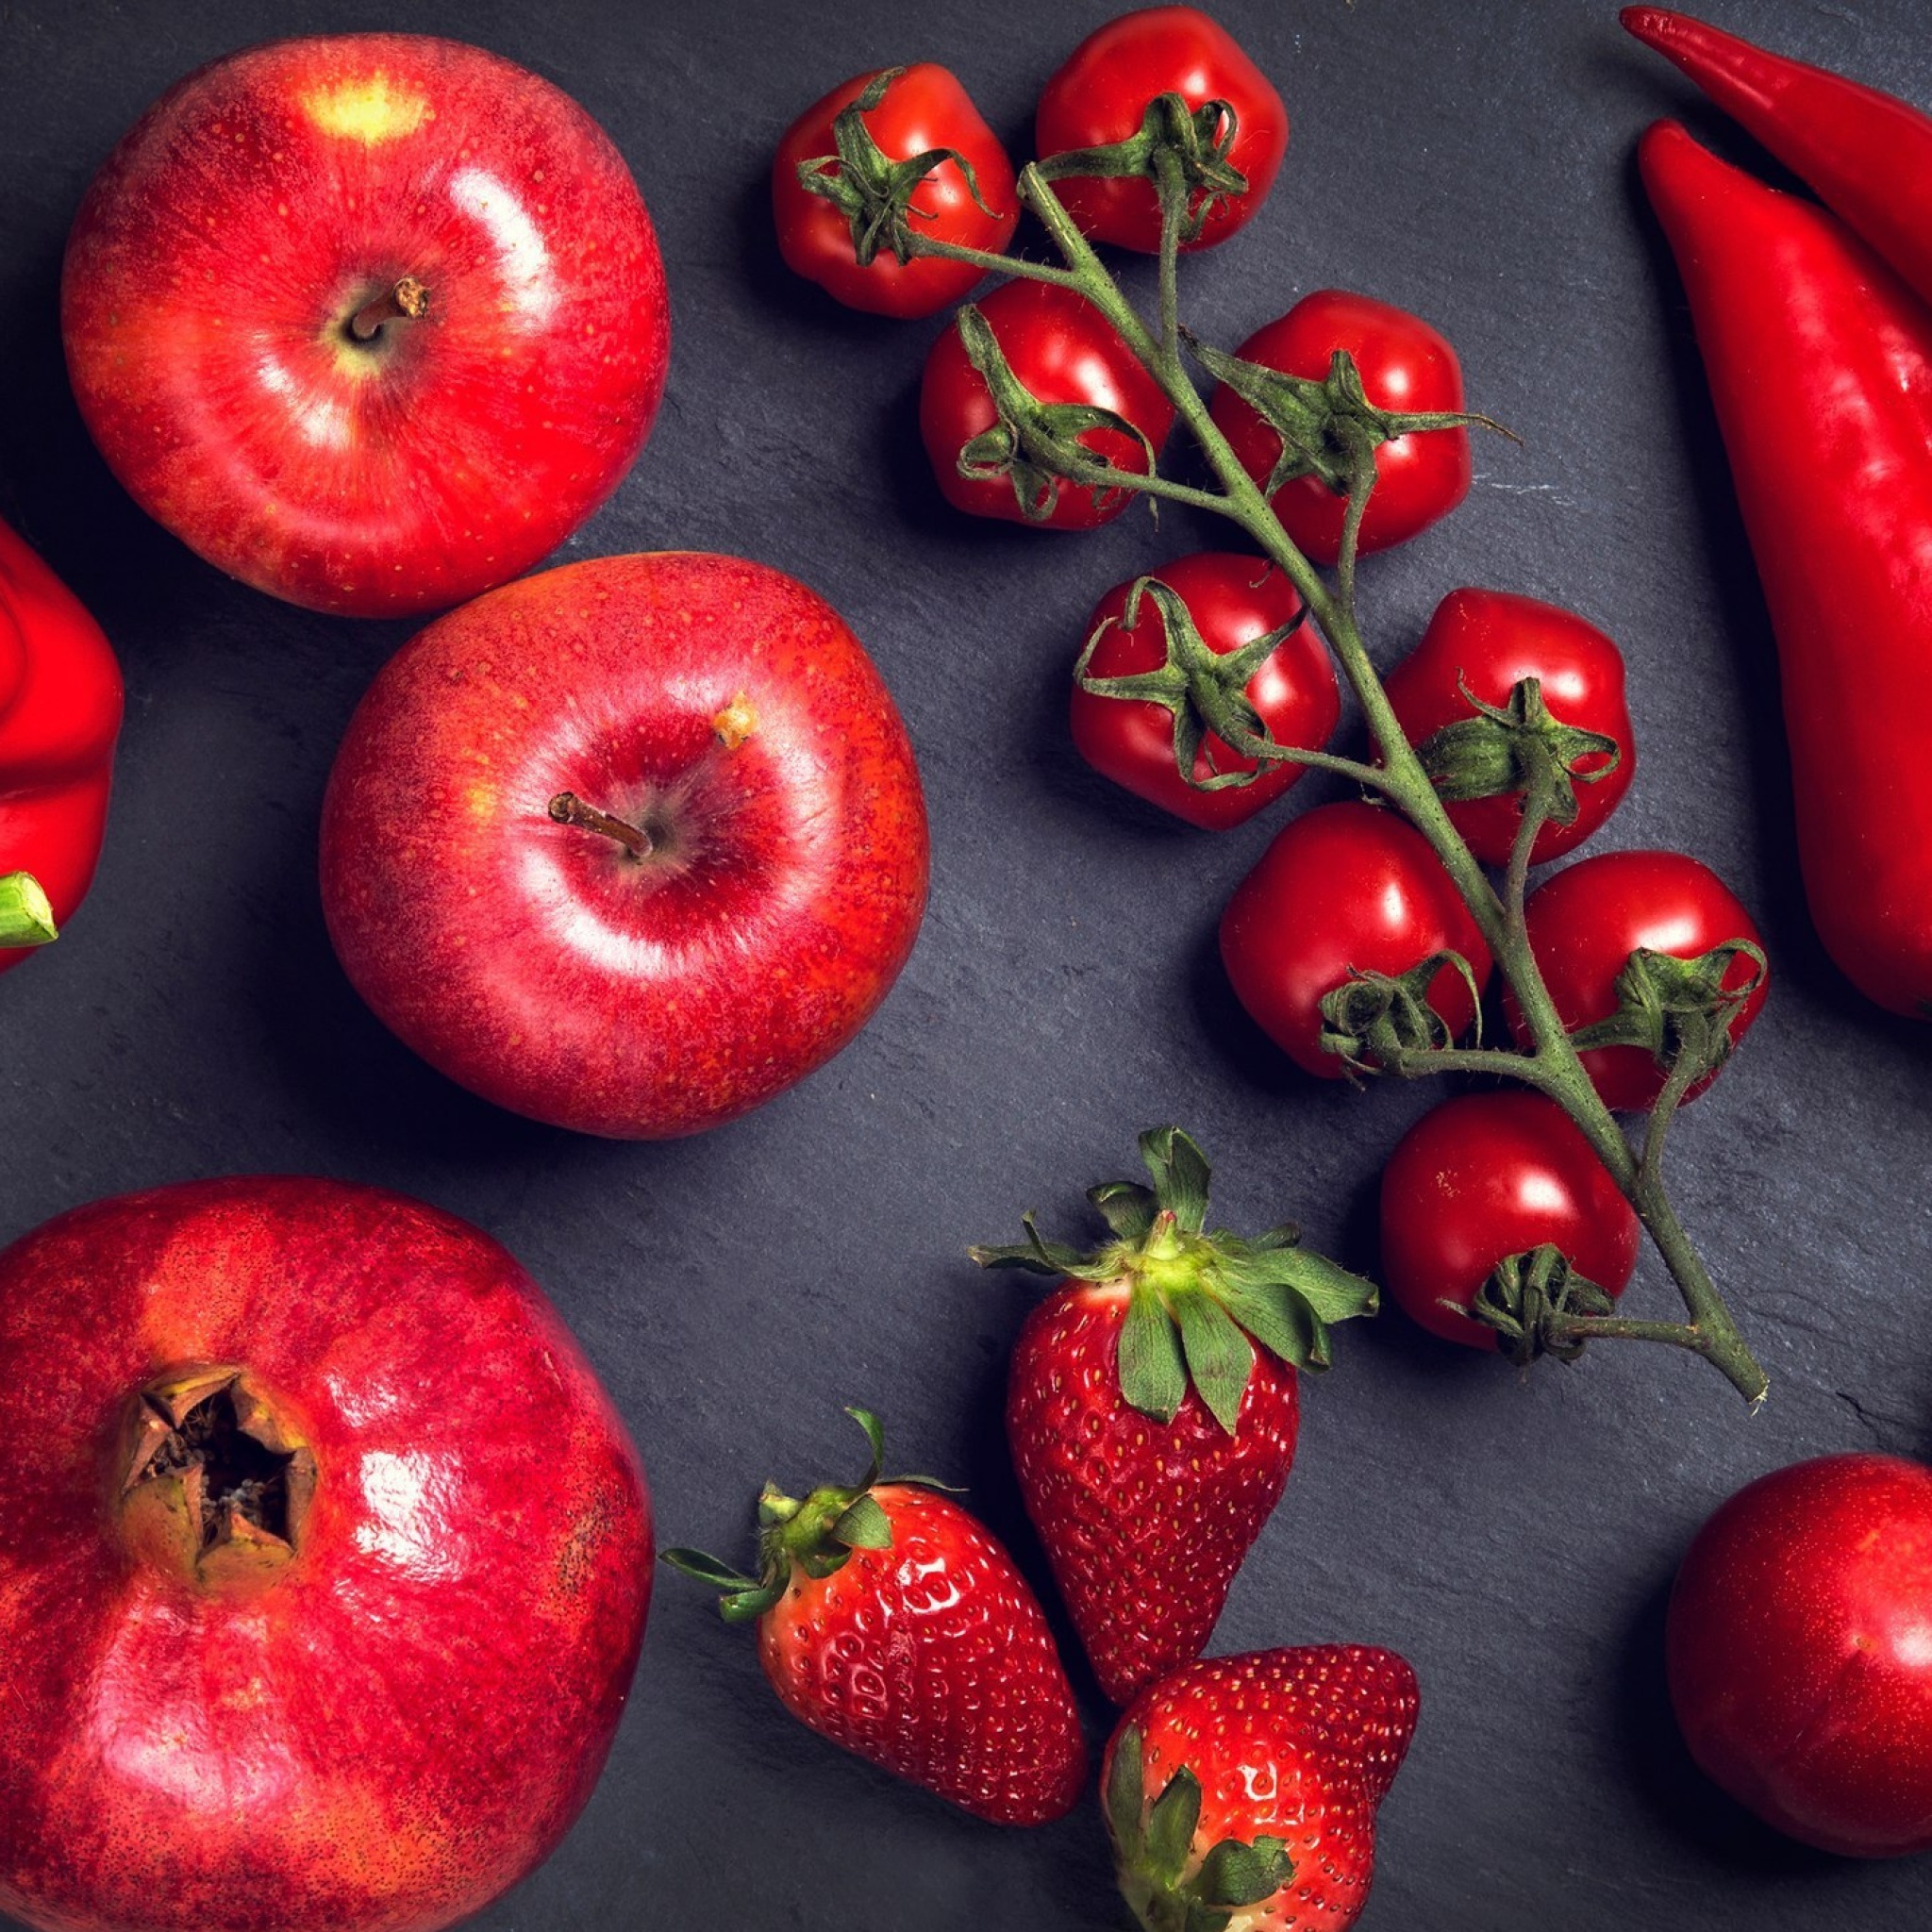 Red fruits and vegetables screenshot #1 2048x2048